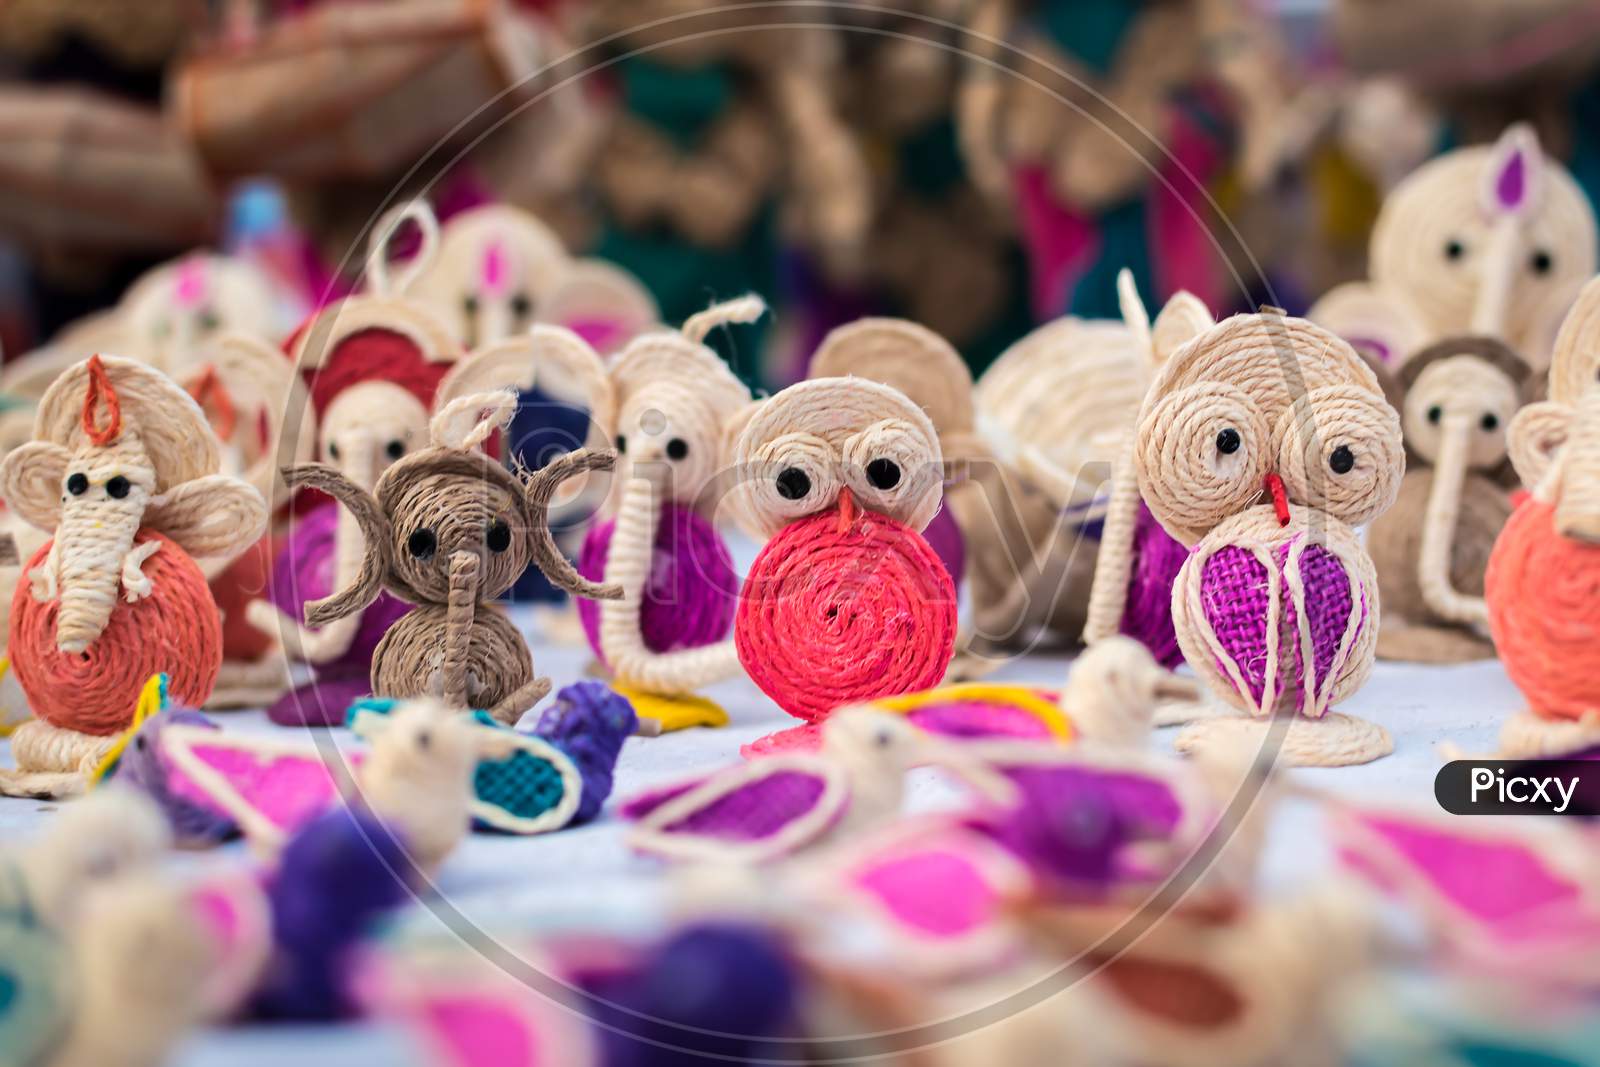 Indian Traditional Handmade Puppet Dolls Made Of Jute Isolated On Blurred Background Is Displayed In A Street Shop For Sale. Indian Handicraft And Art